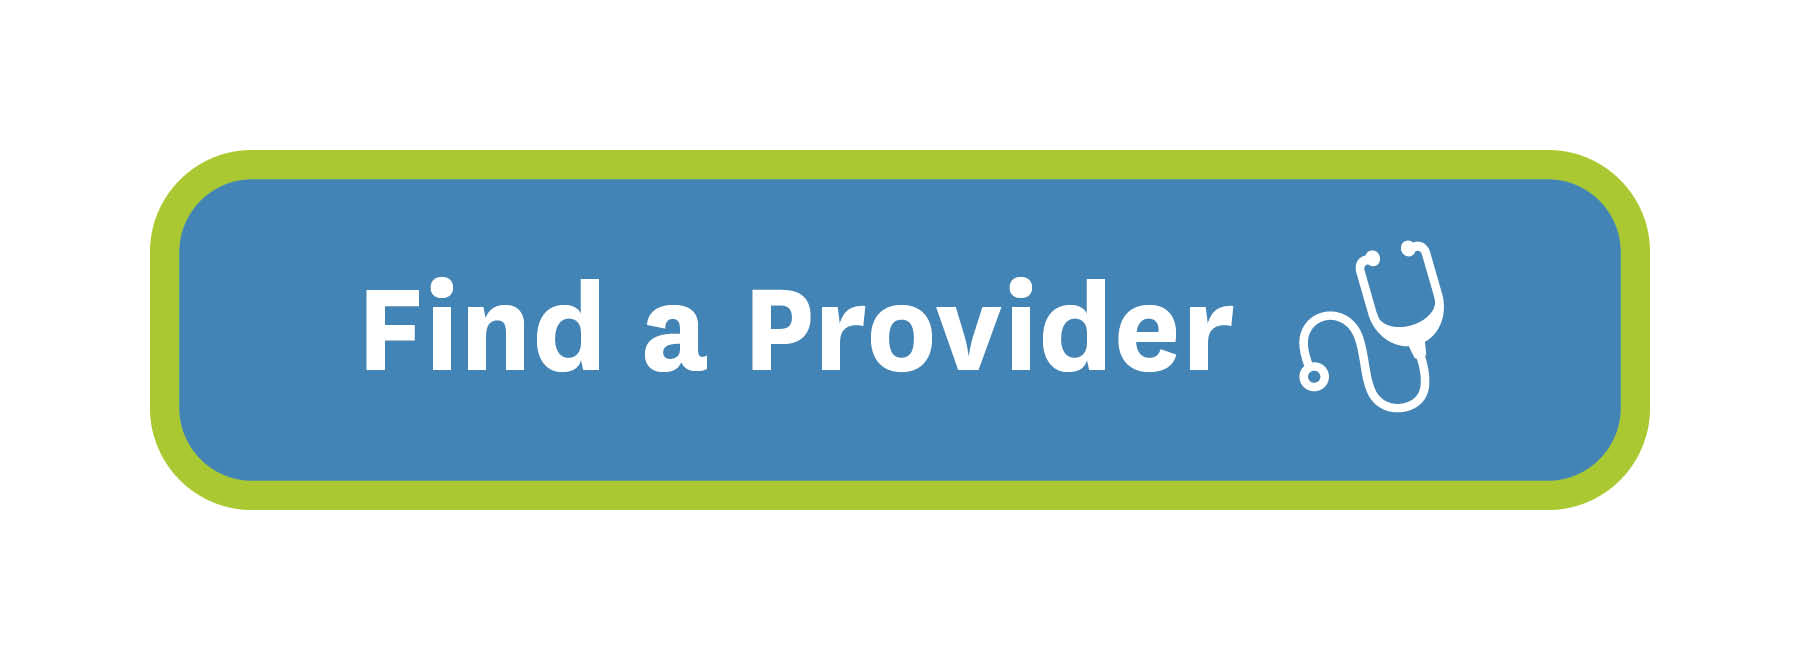  Find a Provider